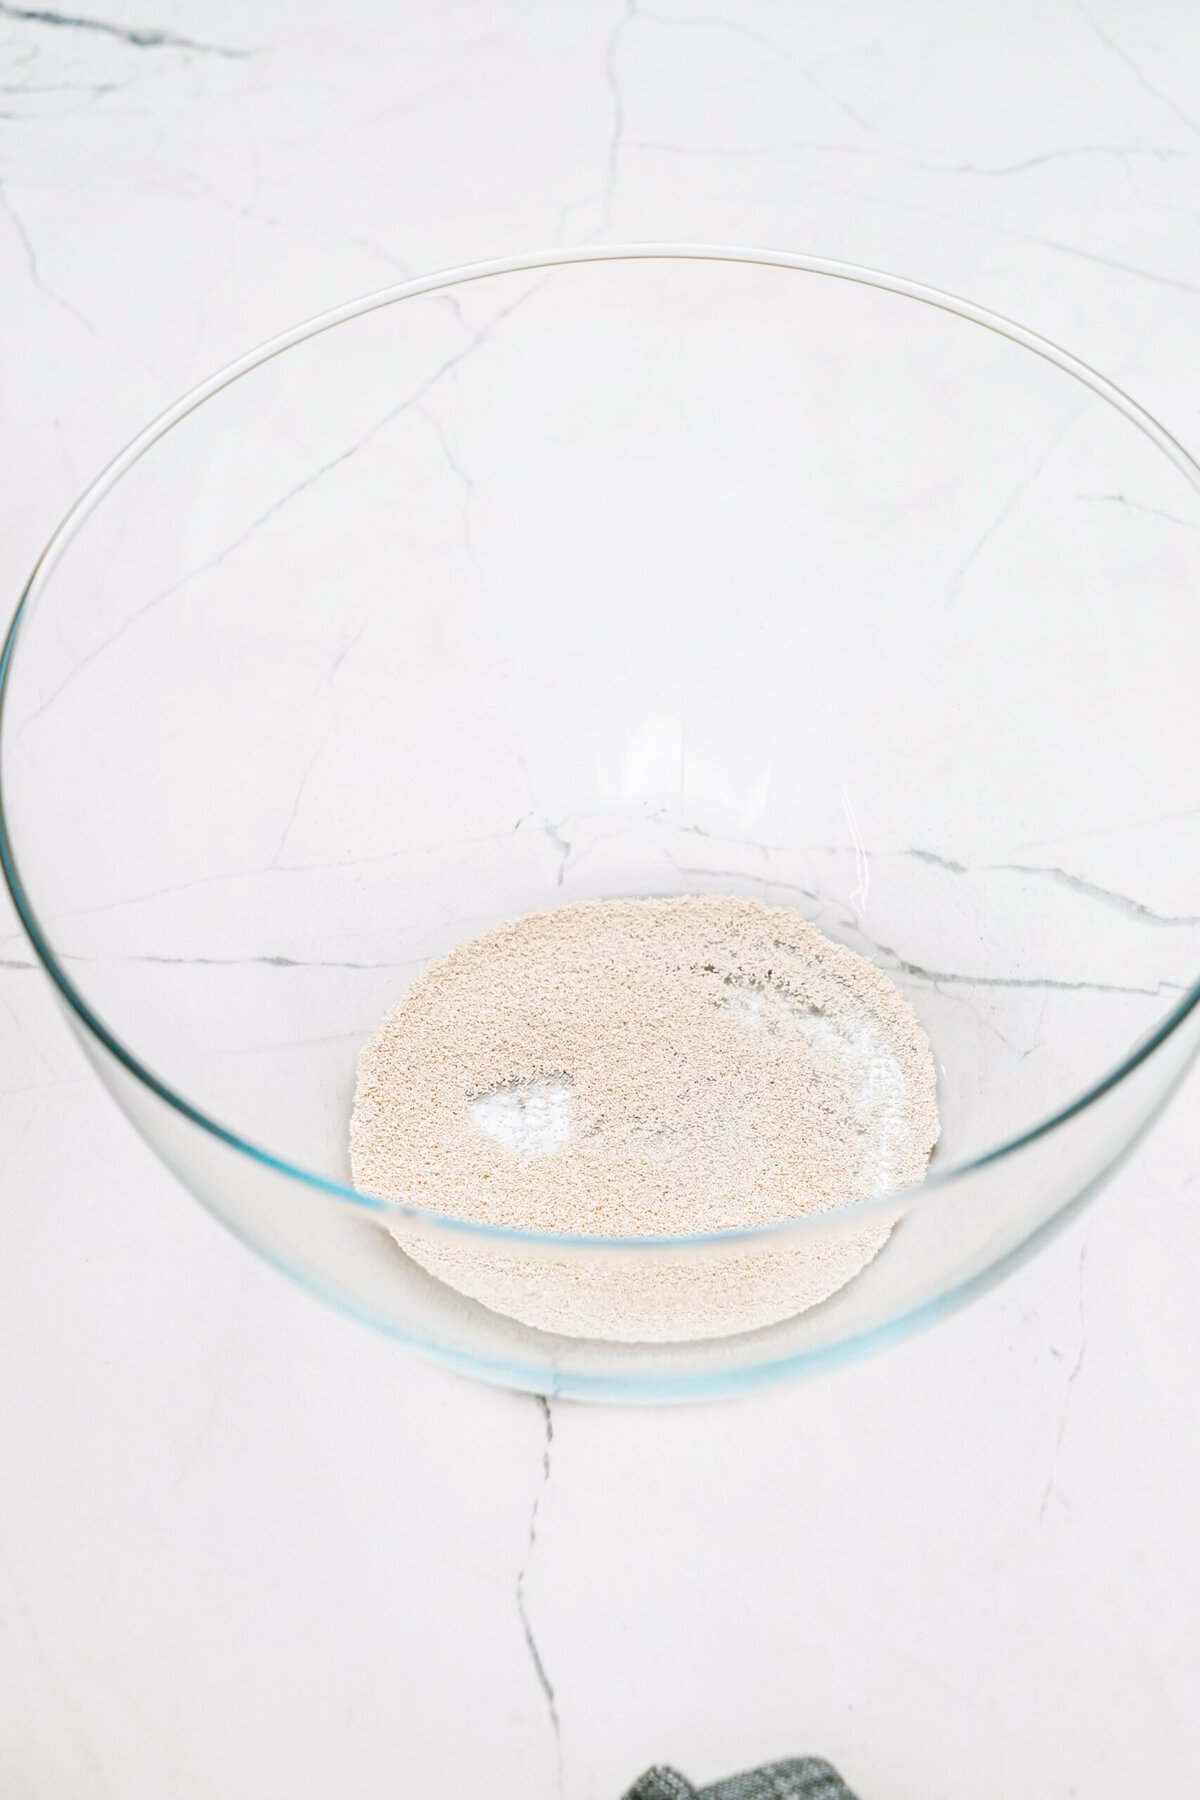 dry yeast in a bowl